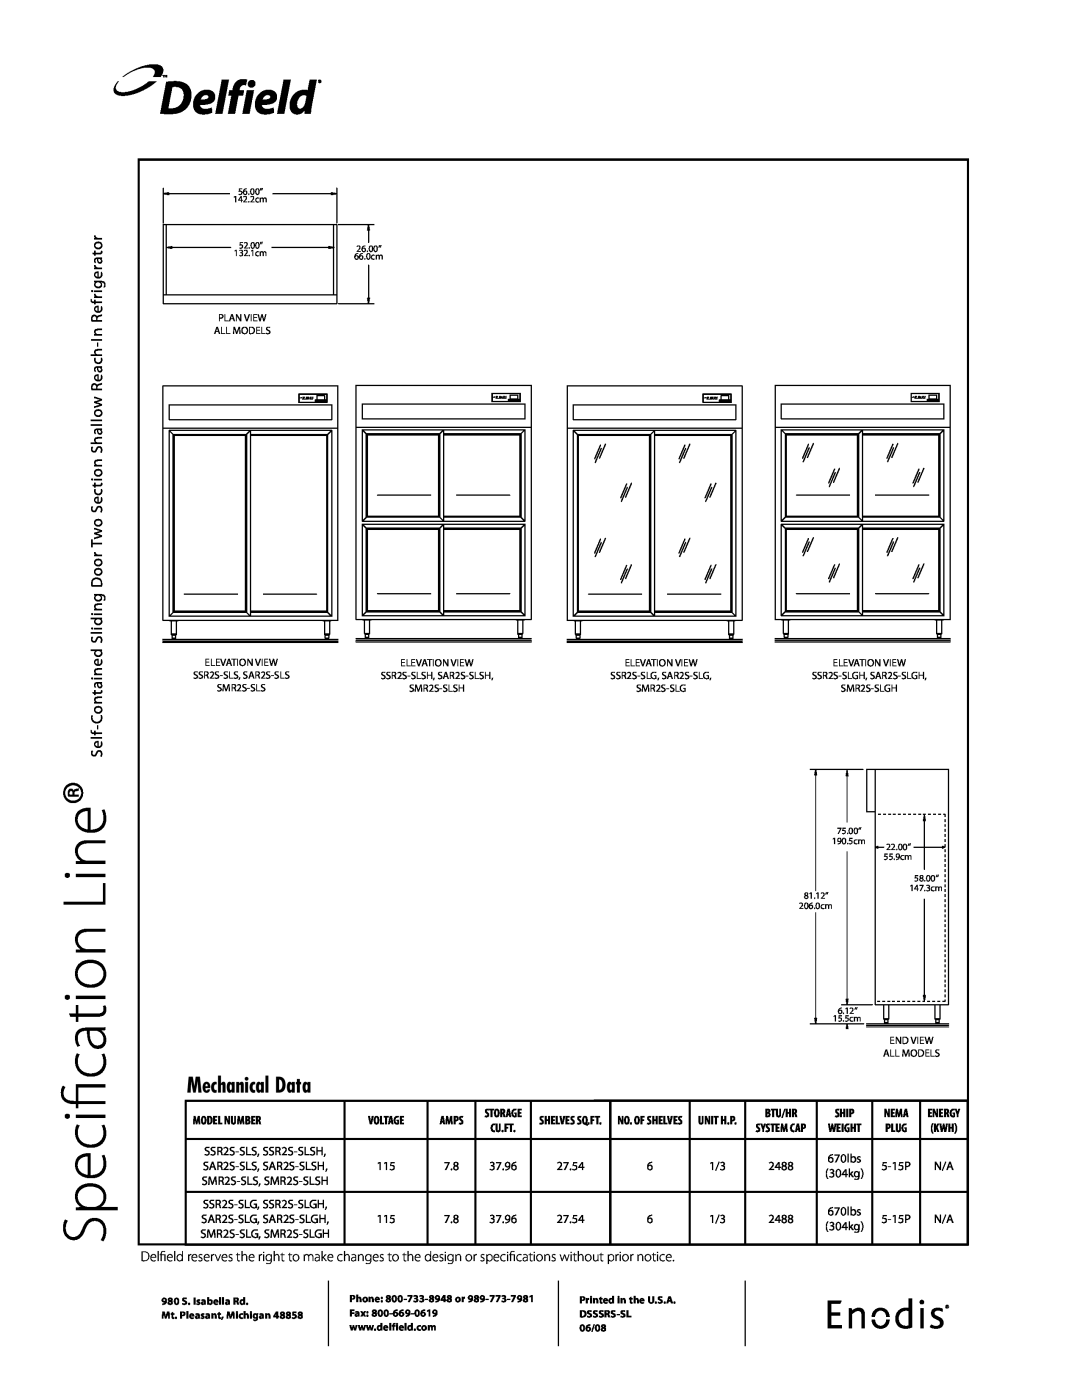 Delfield SSR2S-SLGH Line, Specification, Delfield, Mechanical Data, Refrigerator, Self-Contained, Model Number, Nema, Plug 